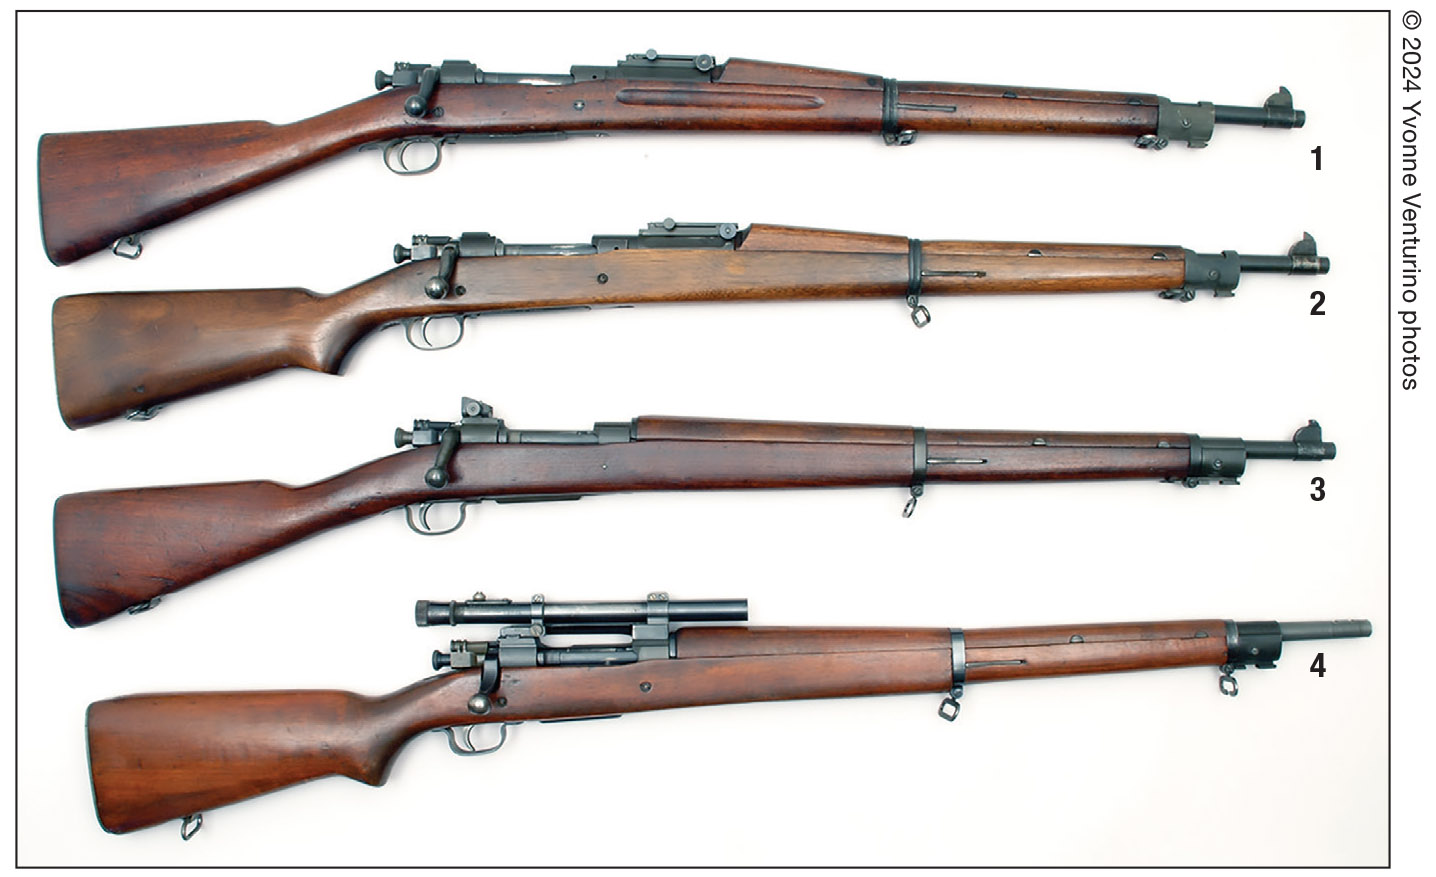 These Model 1903s include: (1) Model 1903, (2) Model 1903A1, (3) Model 1903A3 and (4) Model 1903A4.